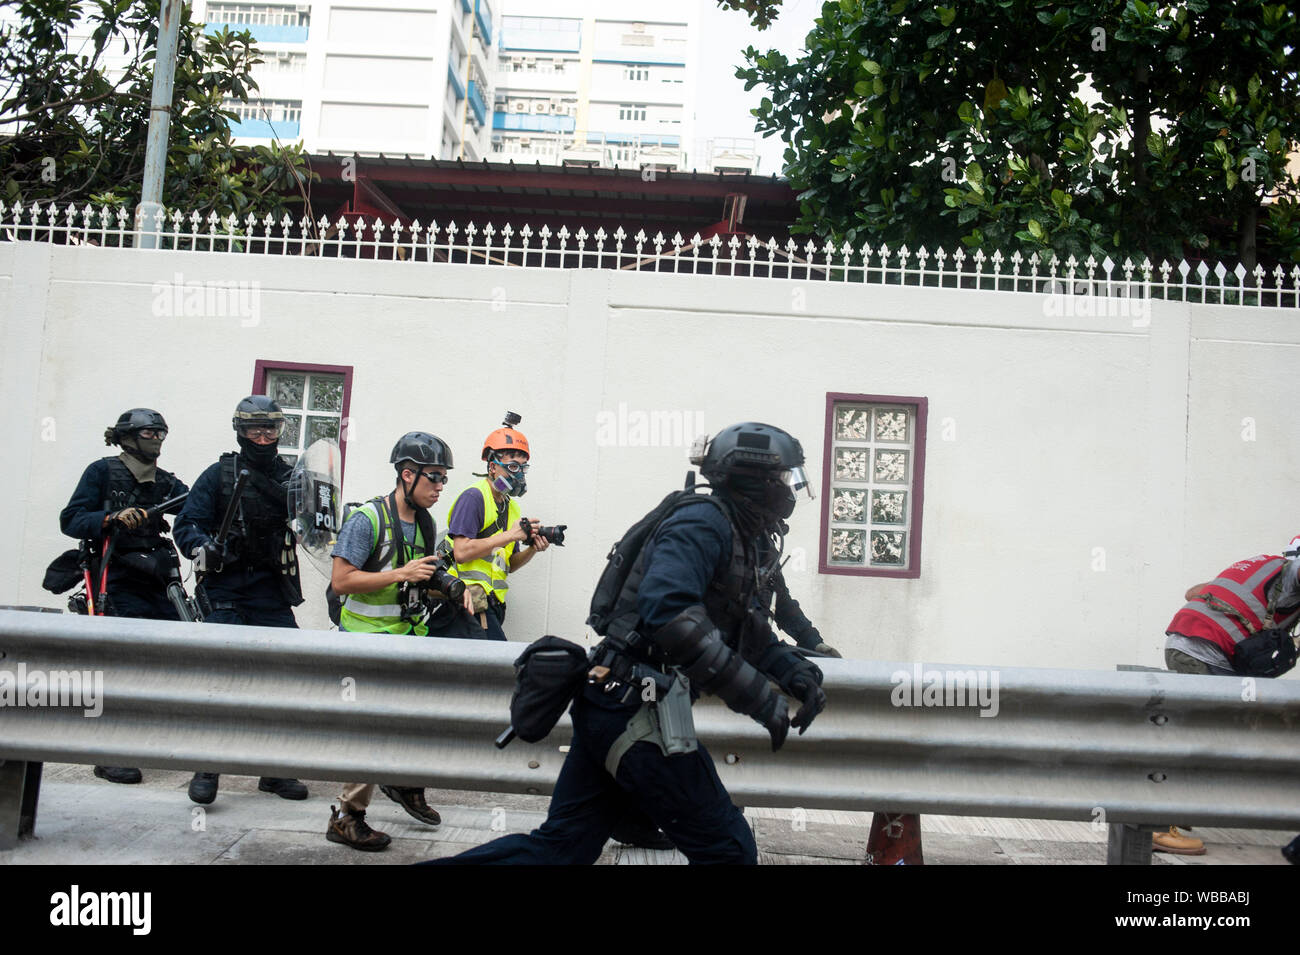 Hong Kong, China. 24th Aug, 2019. A riot police officer charge into the fray to engage in melee combat with the pro-democracy protesters in Kwun Tong after a tense standoff that lasted several hours.Mass demonstrations continues for one more weekend in Hong Kong which began in June 2019 over a now-suspended extradition bill to China. Credit: SOPA Images Limited/Alamy Live News Stock Photo